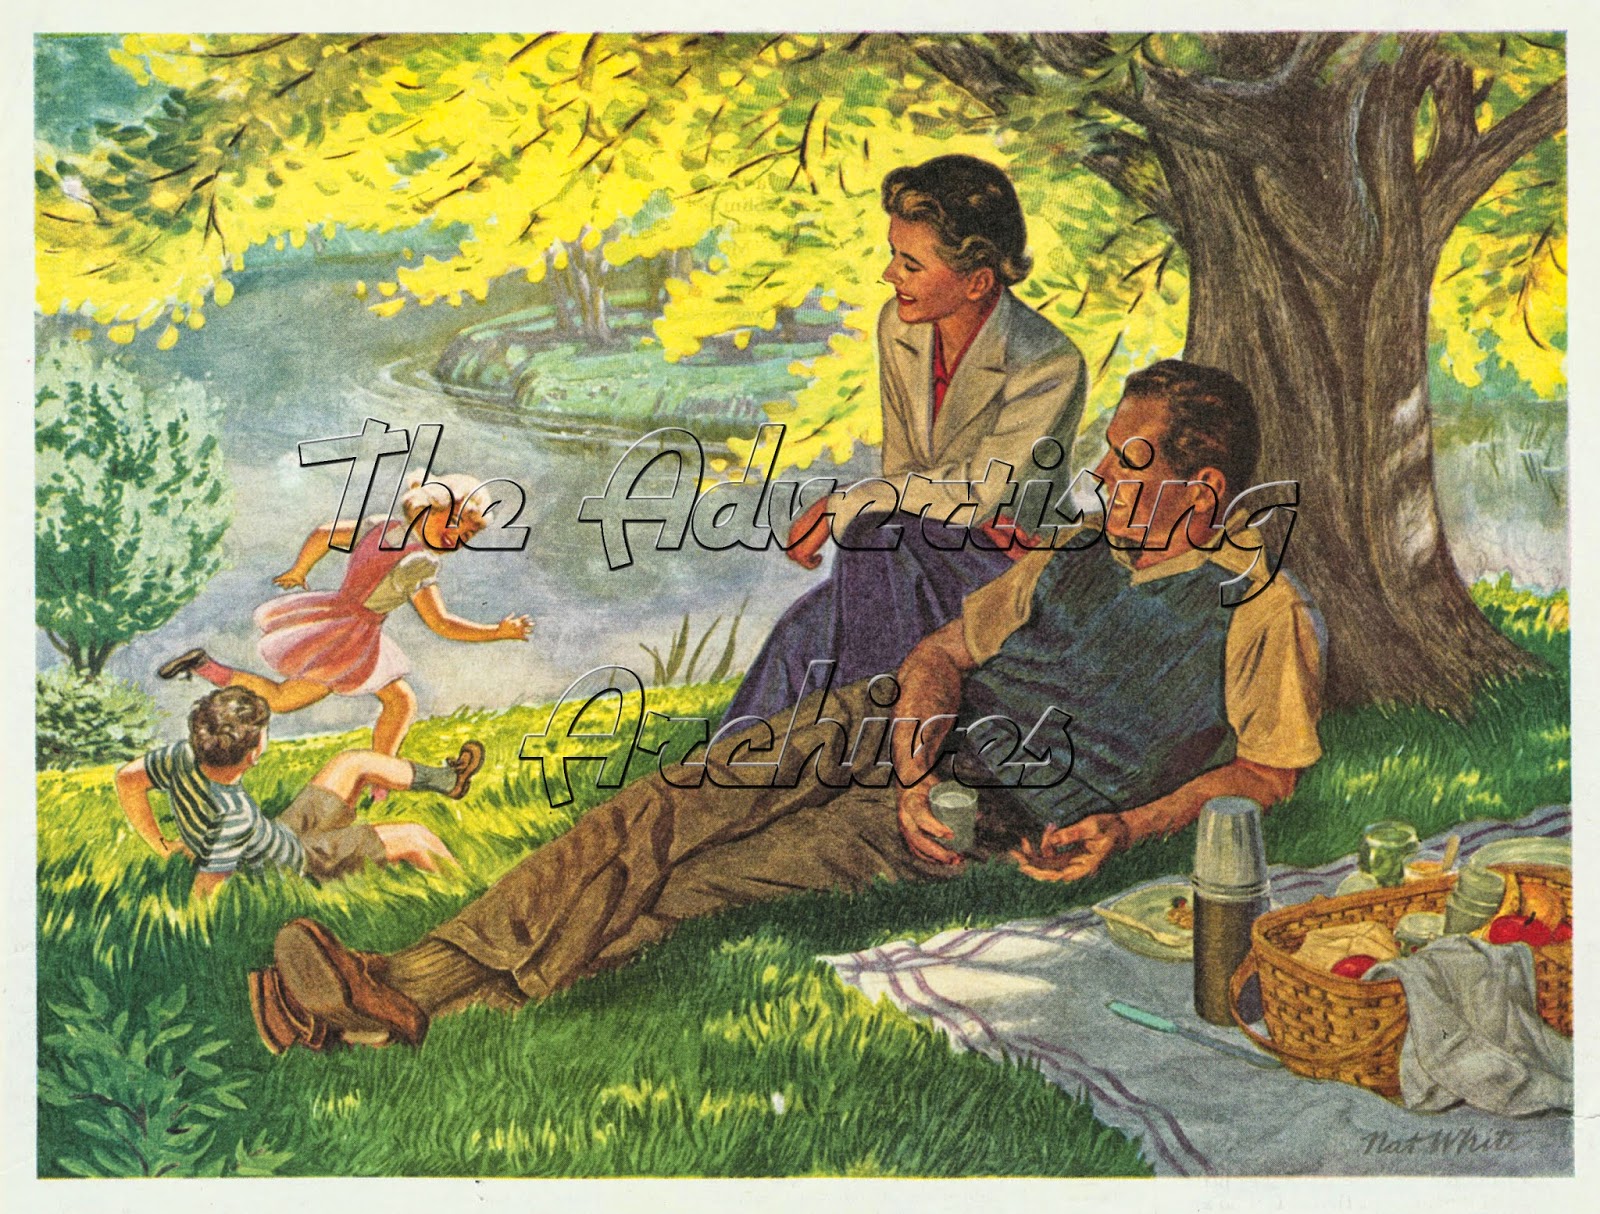 http://www.advertisingarchives.co.uk/index.php?service=search&action=do_quick_search&language=en&q=picnics